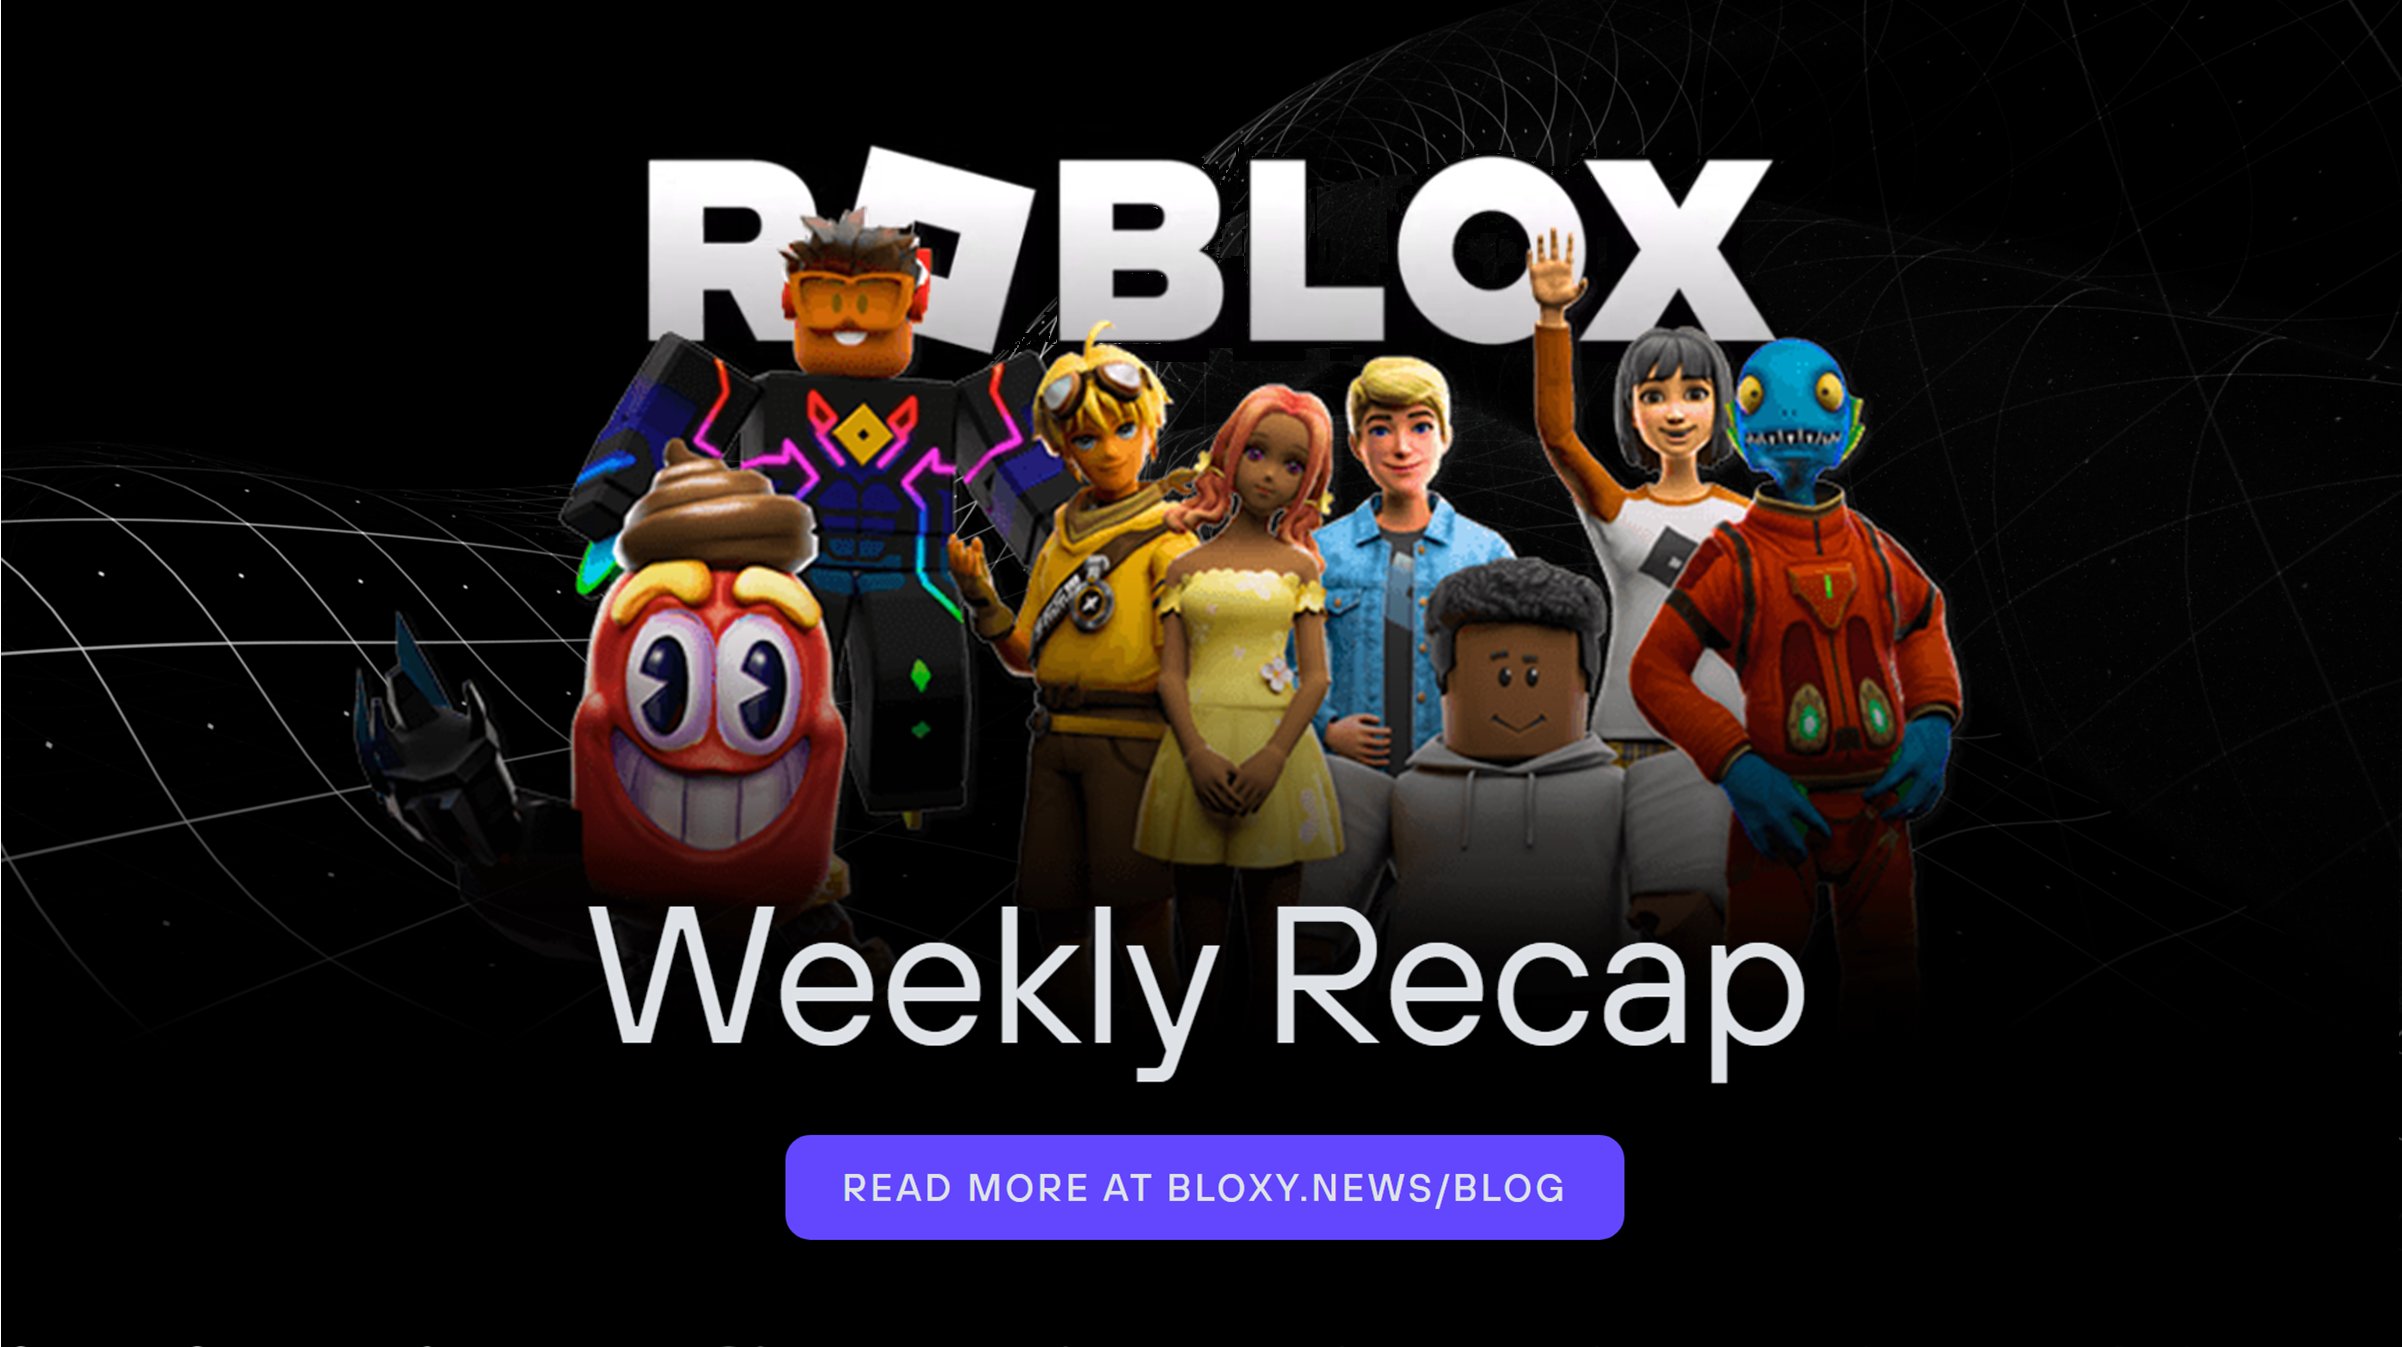 Bloxy News on X: Roblox has published an update that allows for